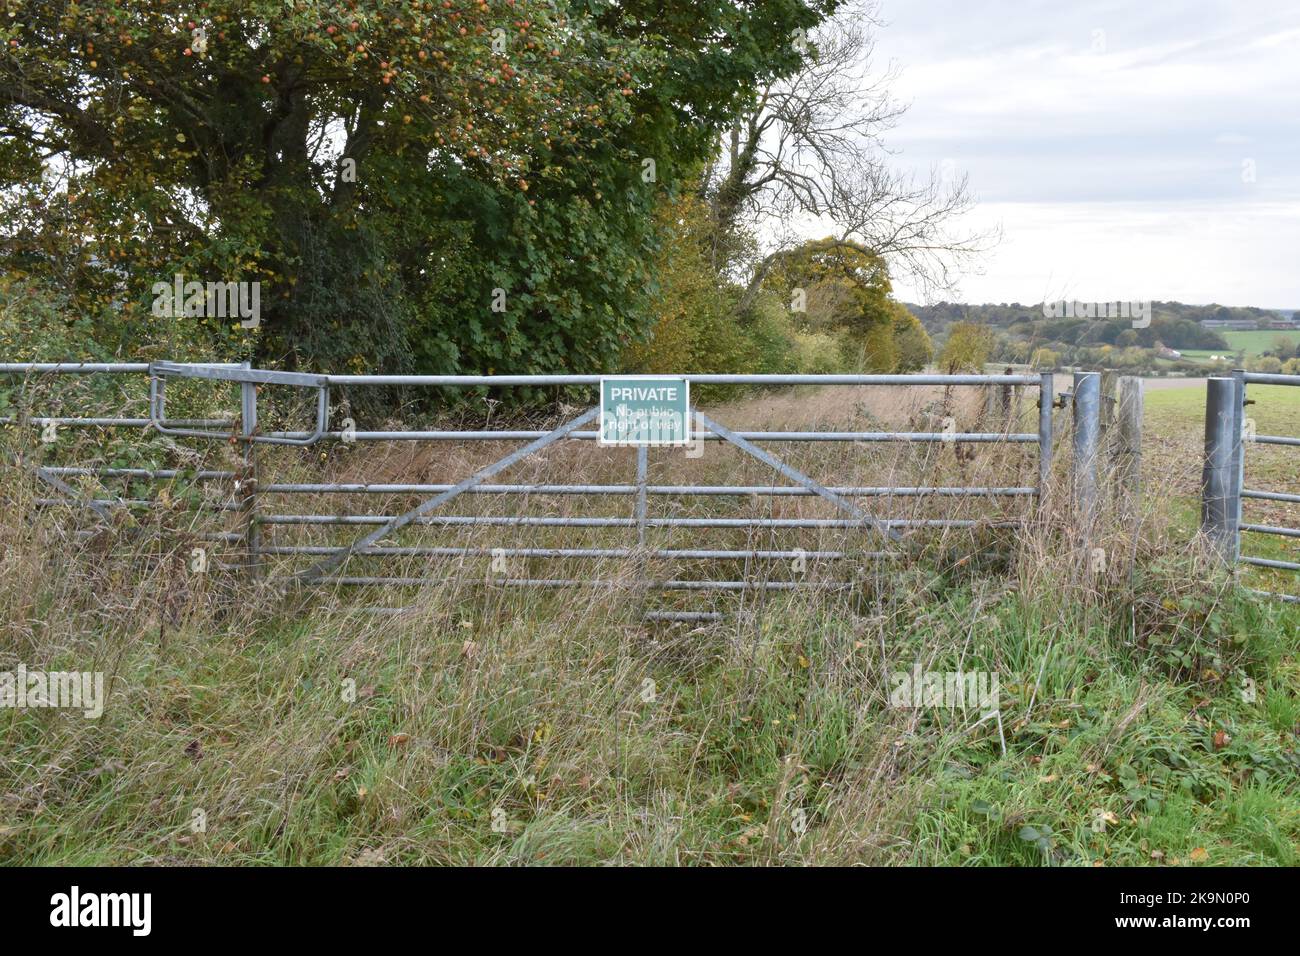 Private No Public Right Of Way Farm Gate, Crab Apples In The Background Below Gallows Down West Berkshire, Nature Taking Over. Stock Photo